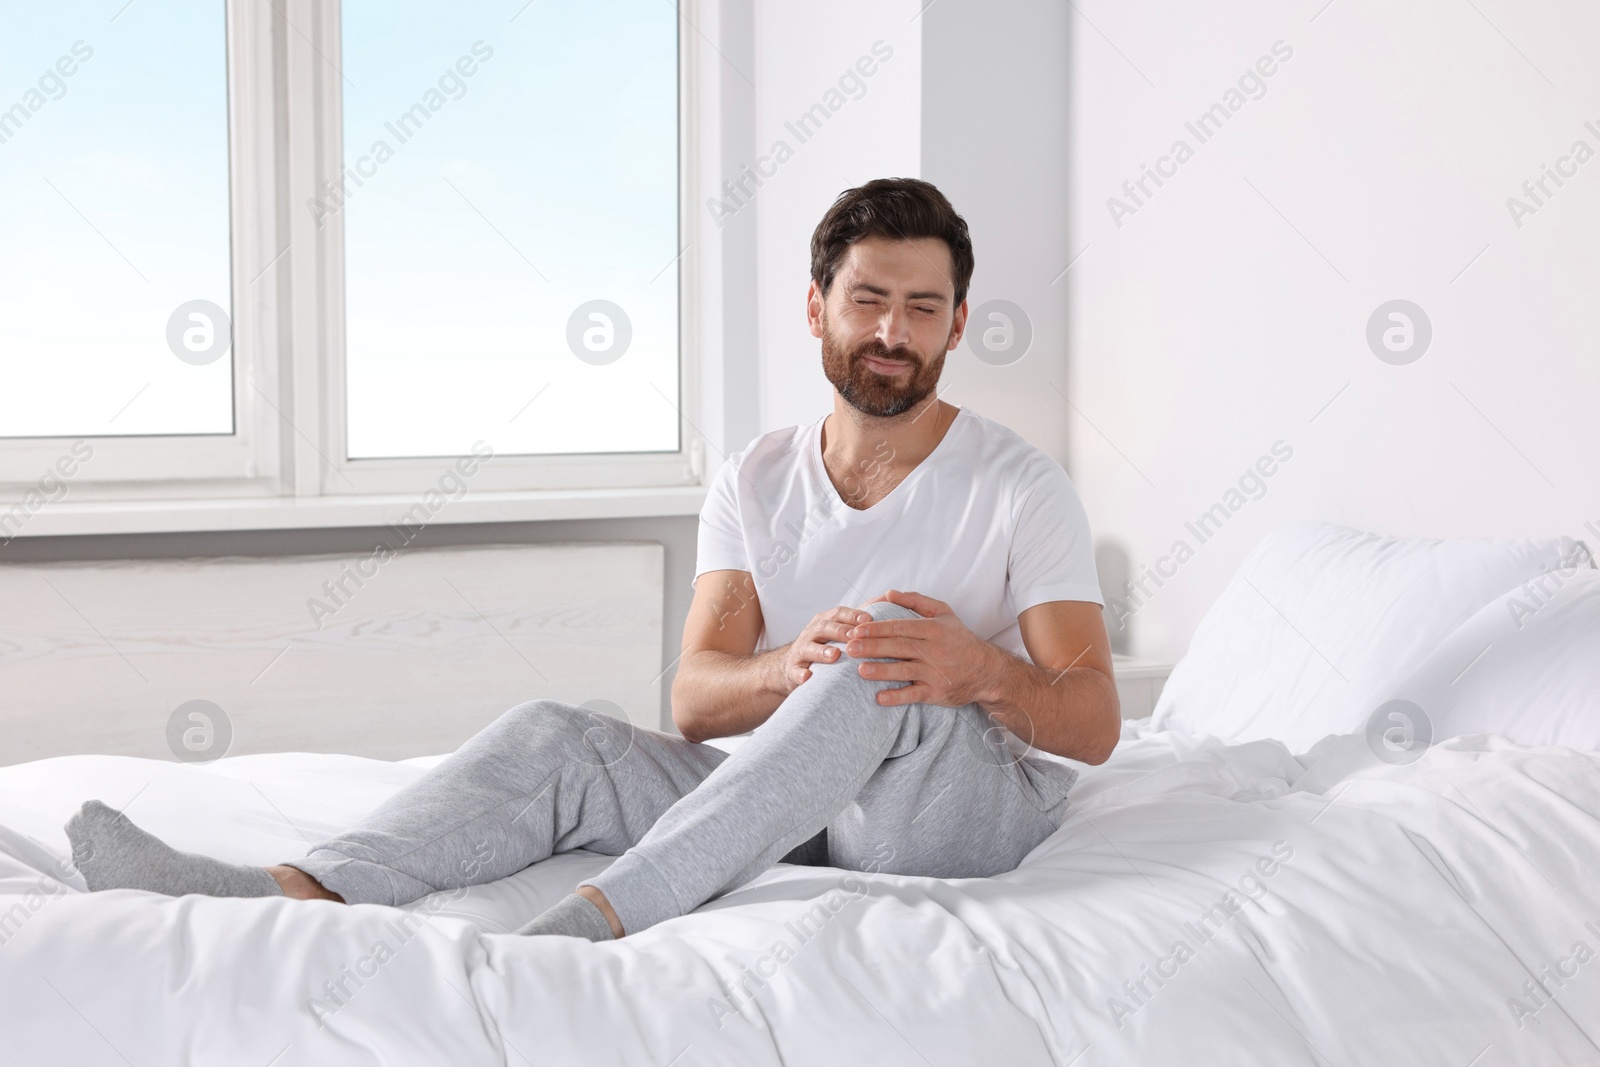 Photo of Man suffering from leg pain on bed at home